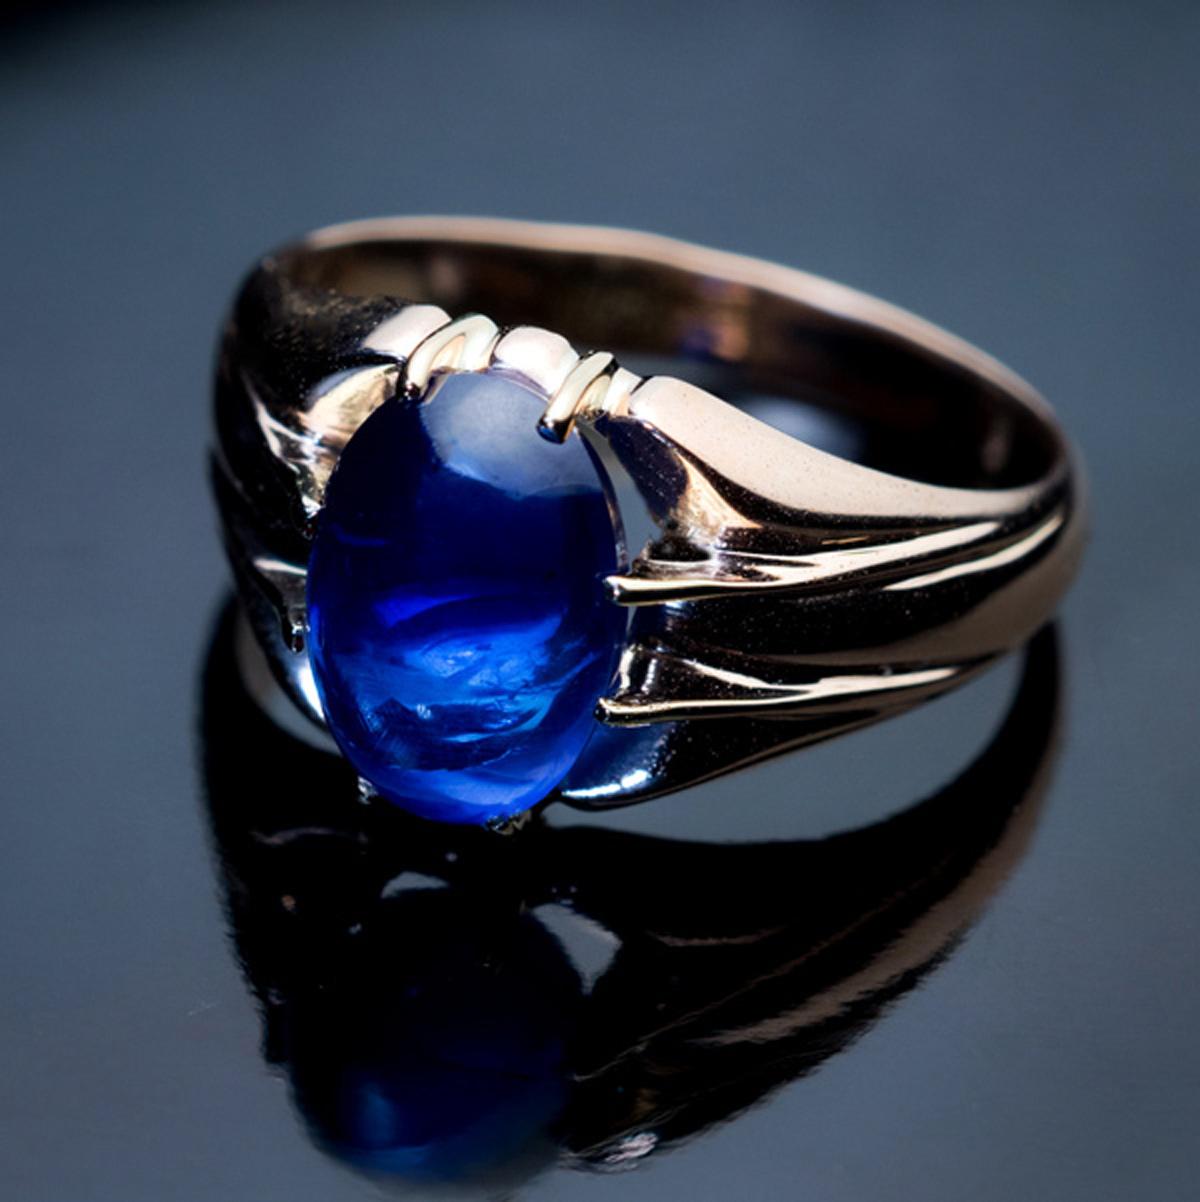 Made in Moscow between 1908 and 1917

This antique 14K gold unisex ring is prong-set with a 5.07 ct cabochon cut natural sapphire of an excellent medium blue color. The sapphire measures 10.73 x 7.46 x 6.45 mm.

The ring is marked with 56 zolotnik